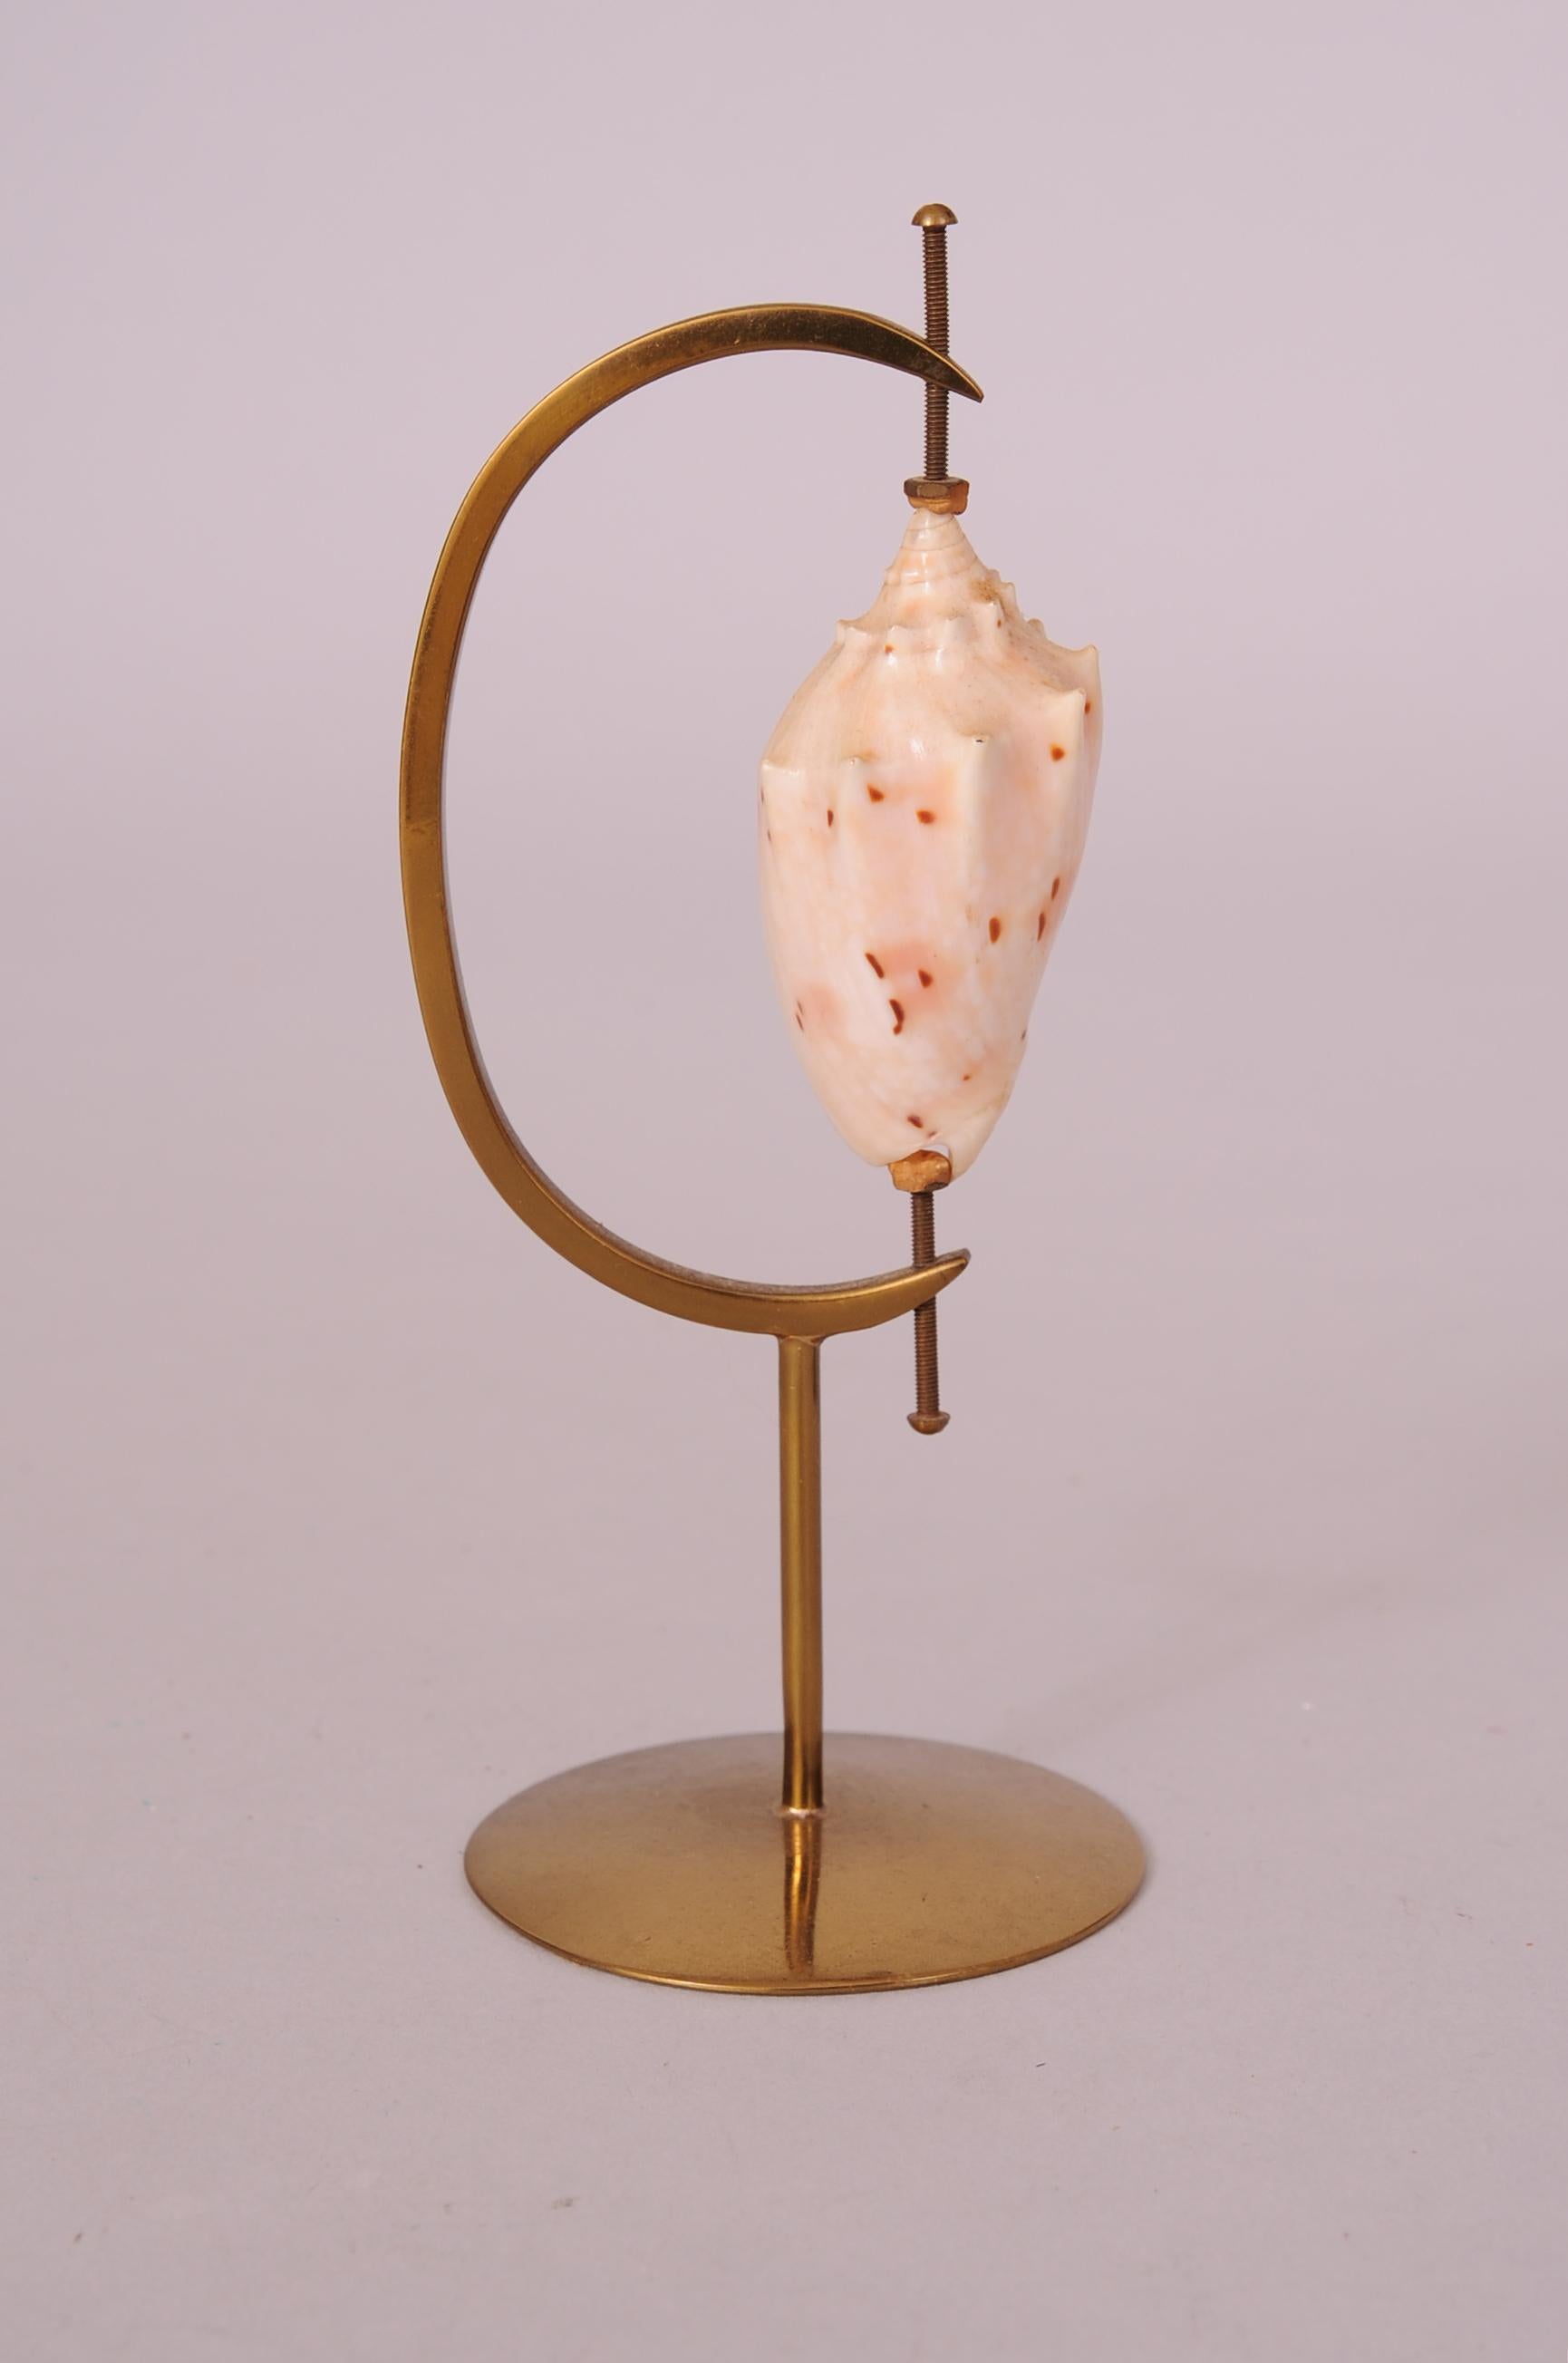 Marguerite Stix is best known for her shell jewelry and her collaboration with her husband on two books about shells. 
They founded the Stix Rare Shell Gallery in Greenwich Village in the 1960's. She designed brass stands to display the rare shells